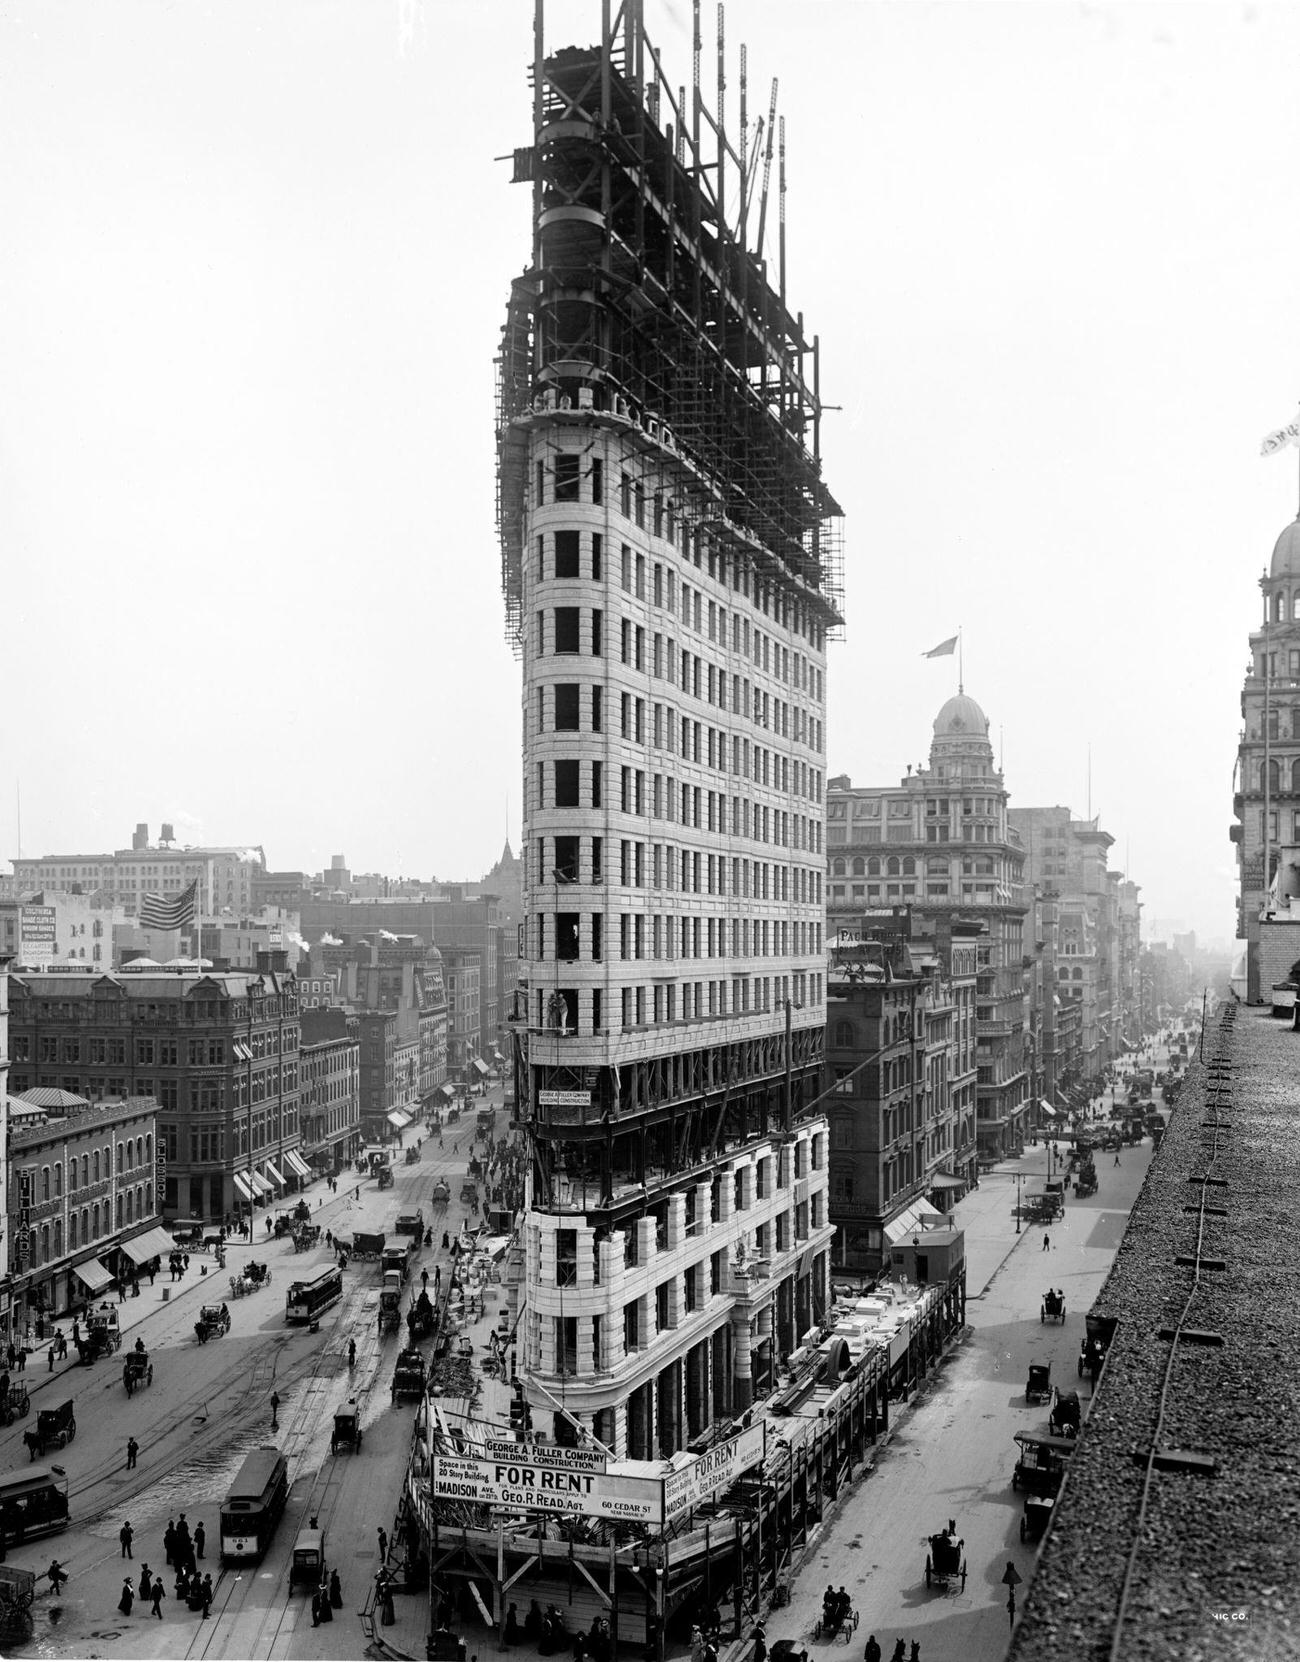 View, Looking South, Of The Flatiron Building, Or The Fuller Building, Under Construction In New York City, 1902.